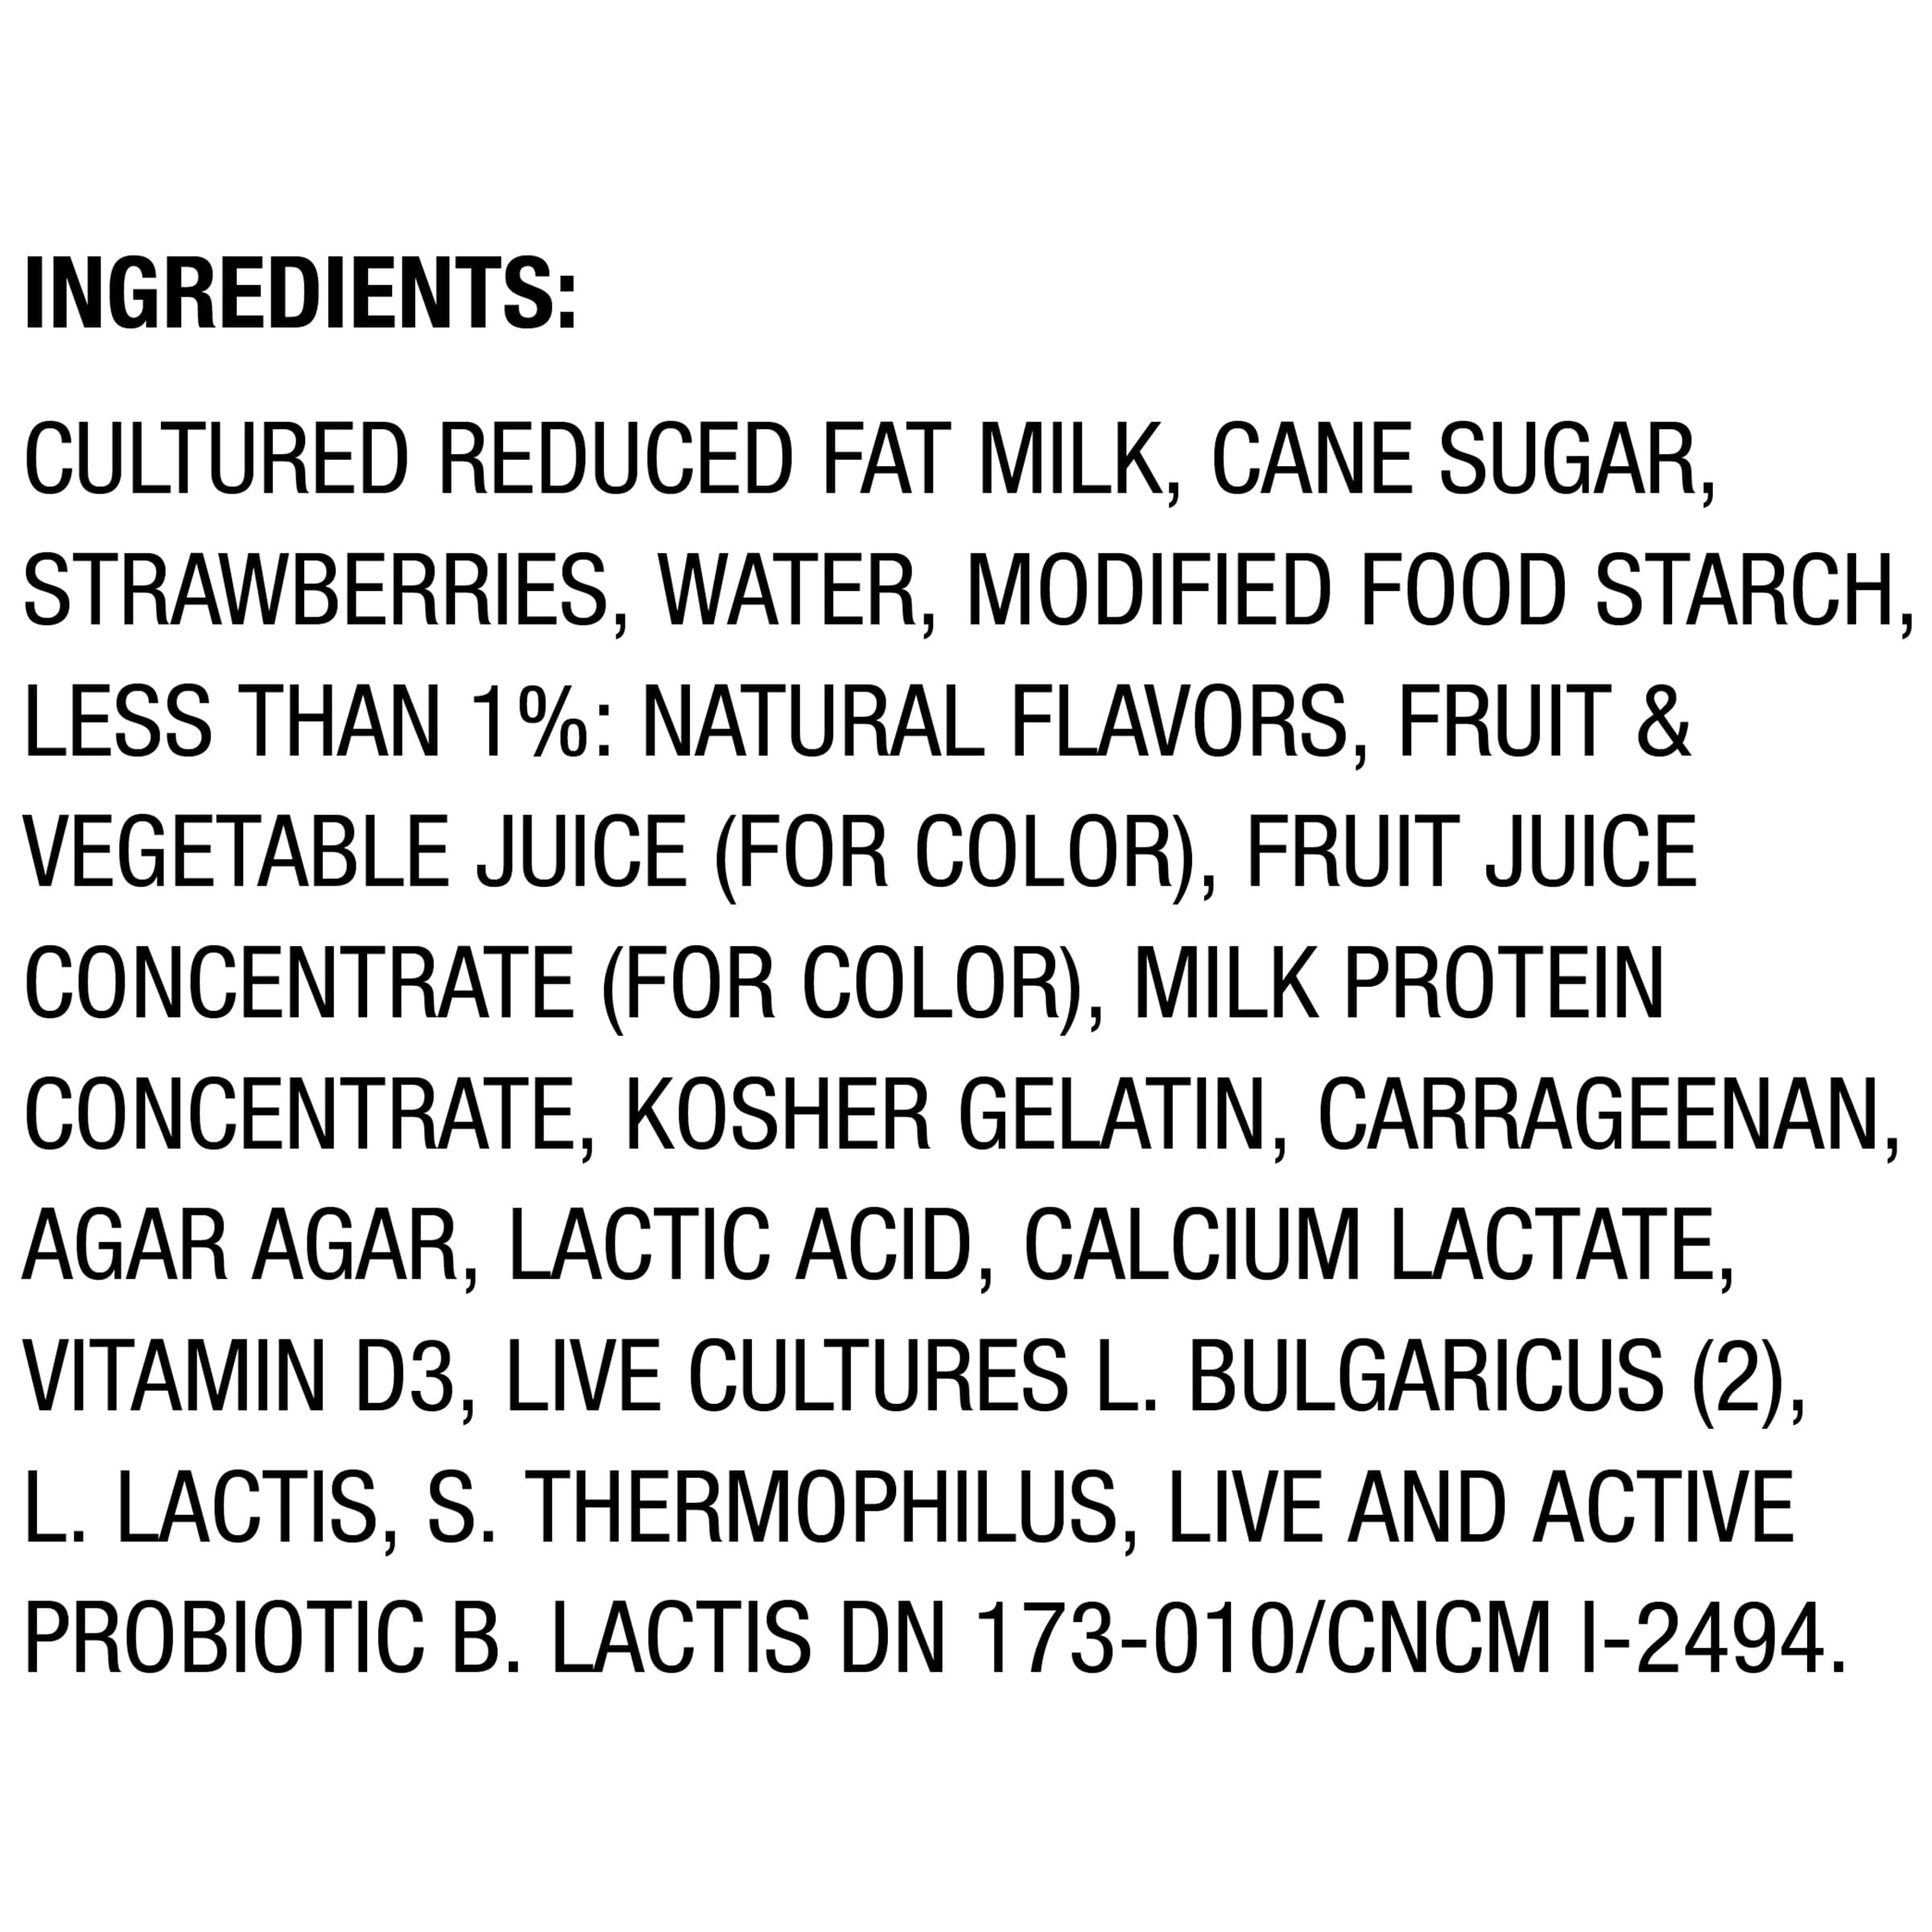 11 Activia Yogurt Nutrition Facts: A Comprehensive Guide to